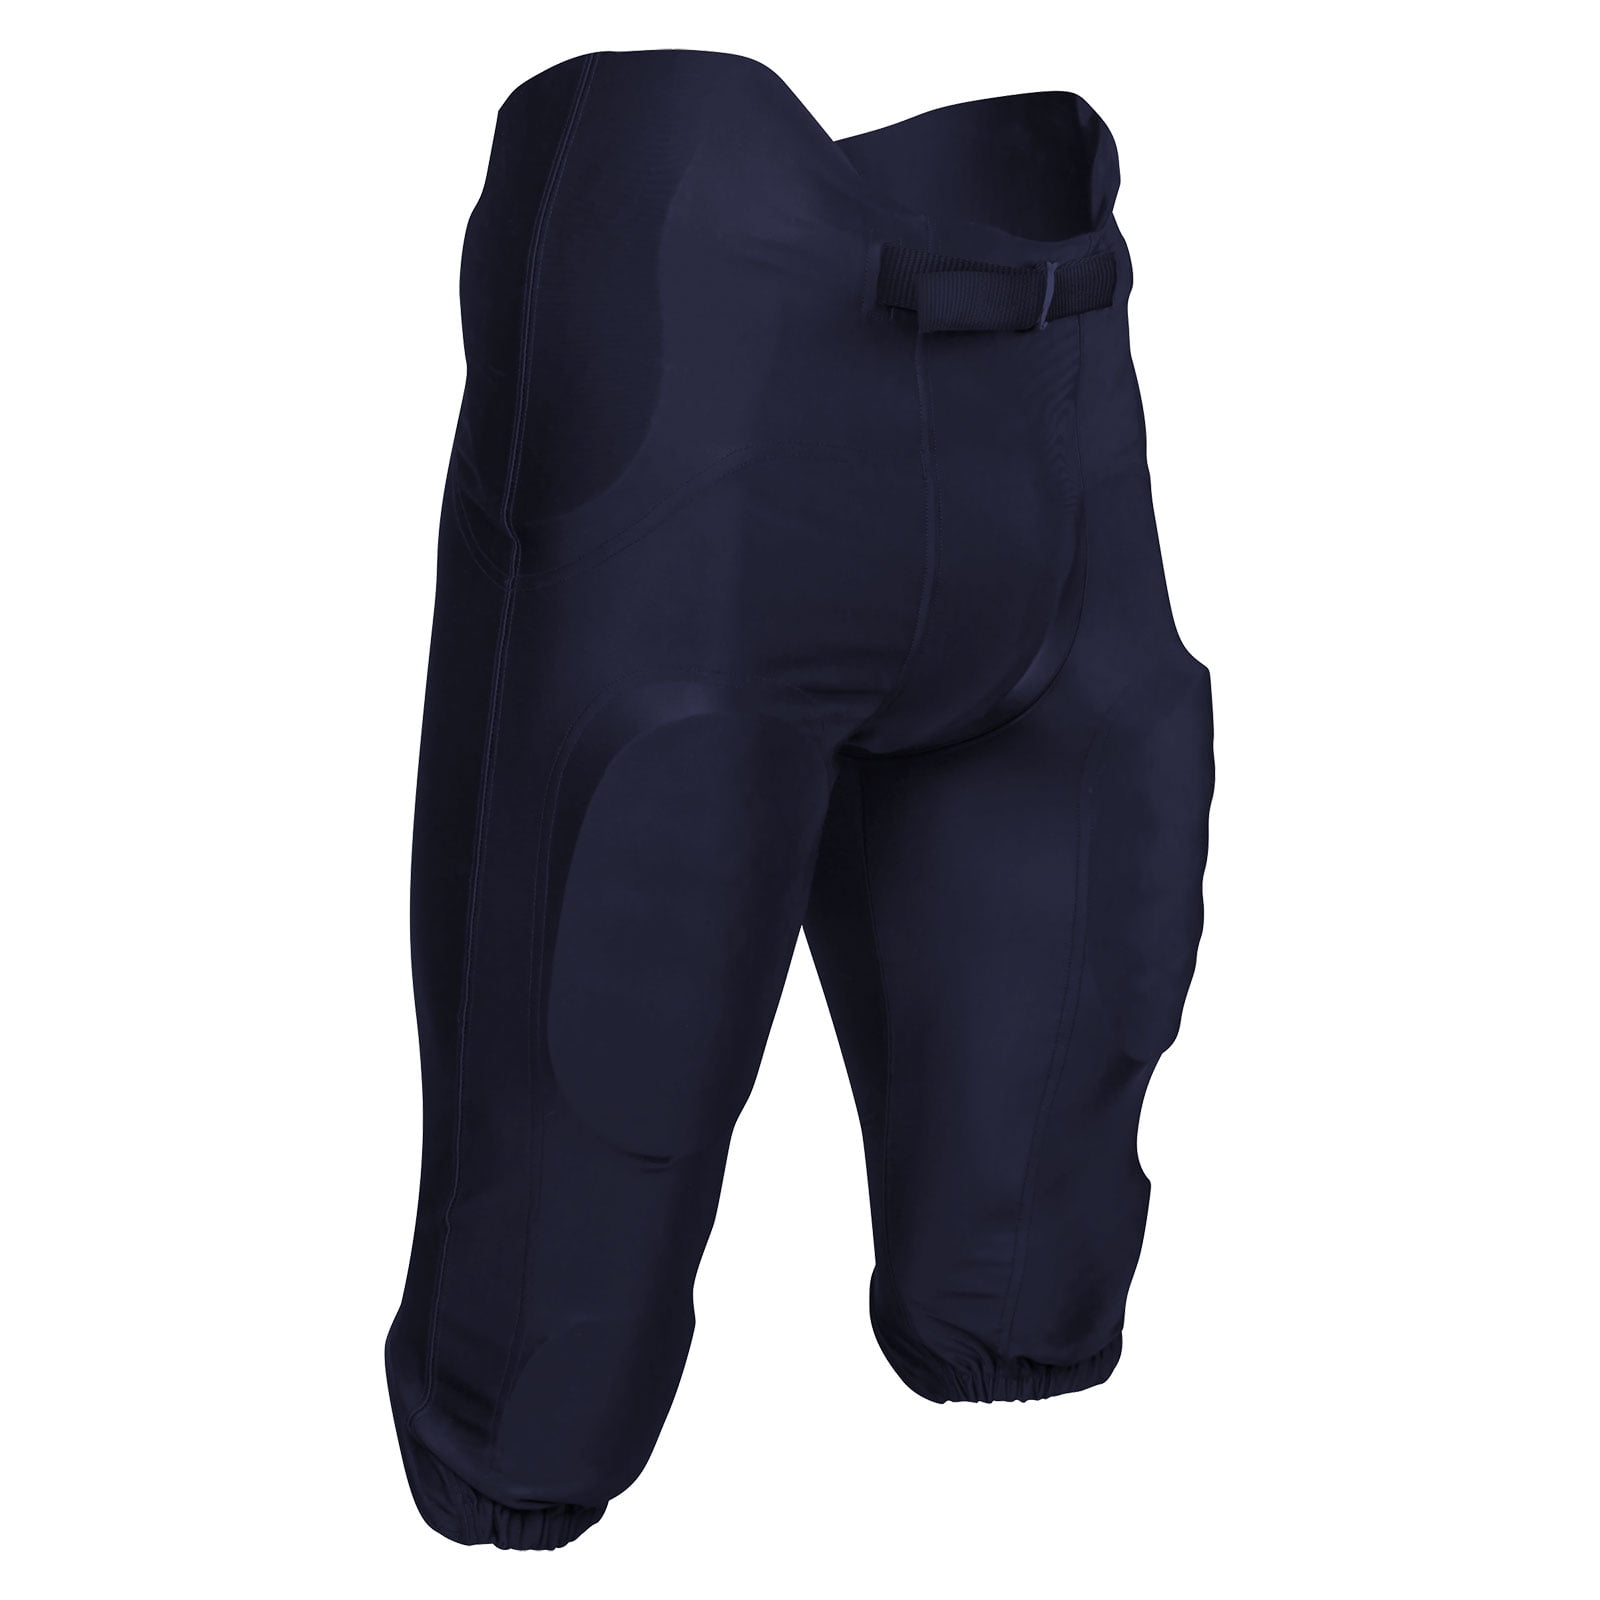 CHAMPRO Integrated Football Game Pant with Built in Pads 3X Adult 